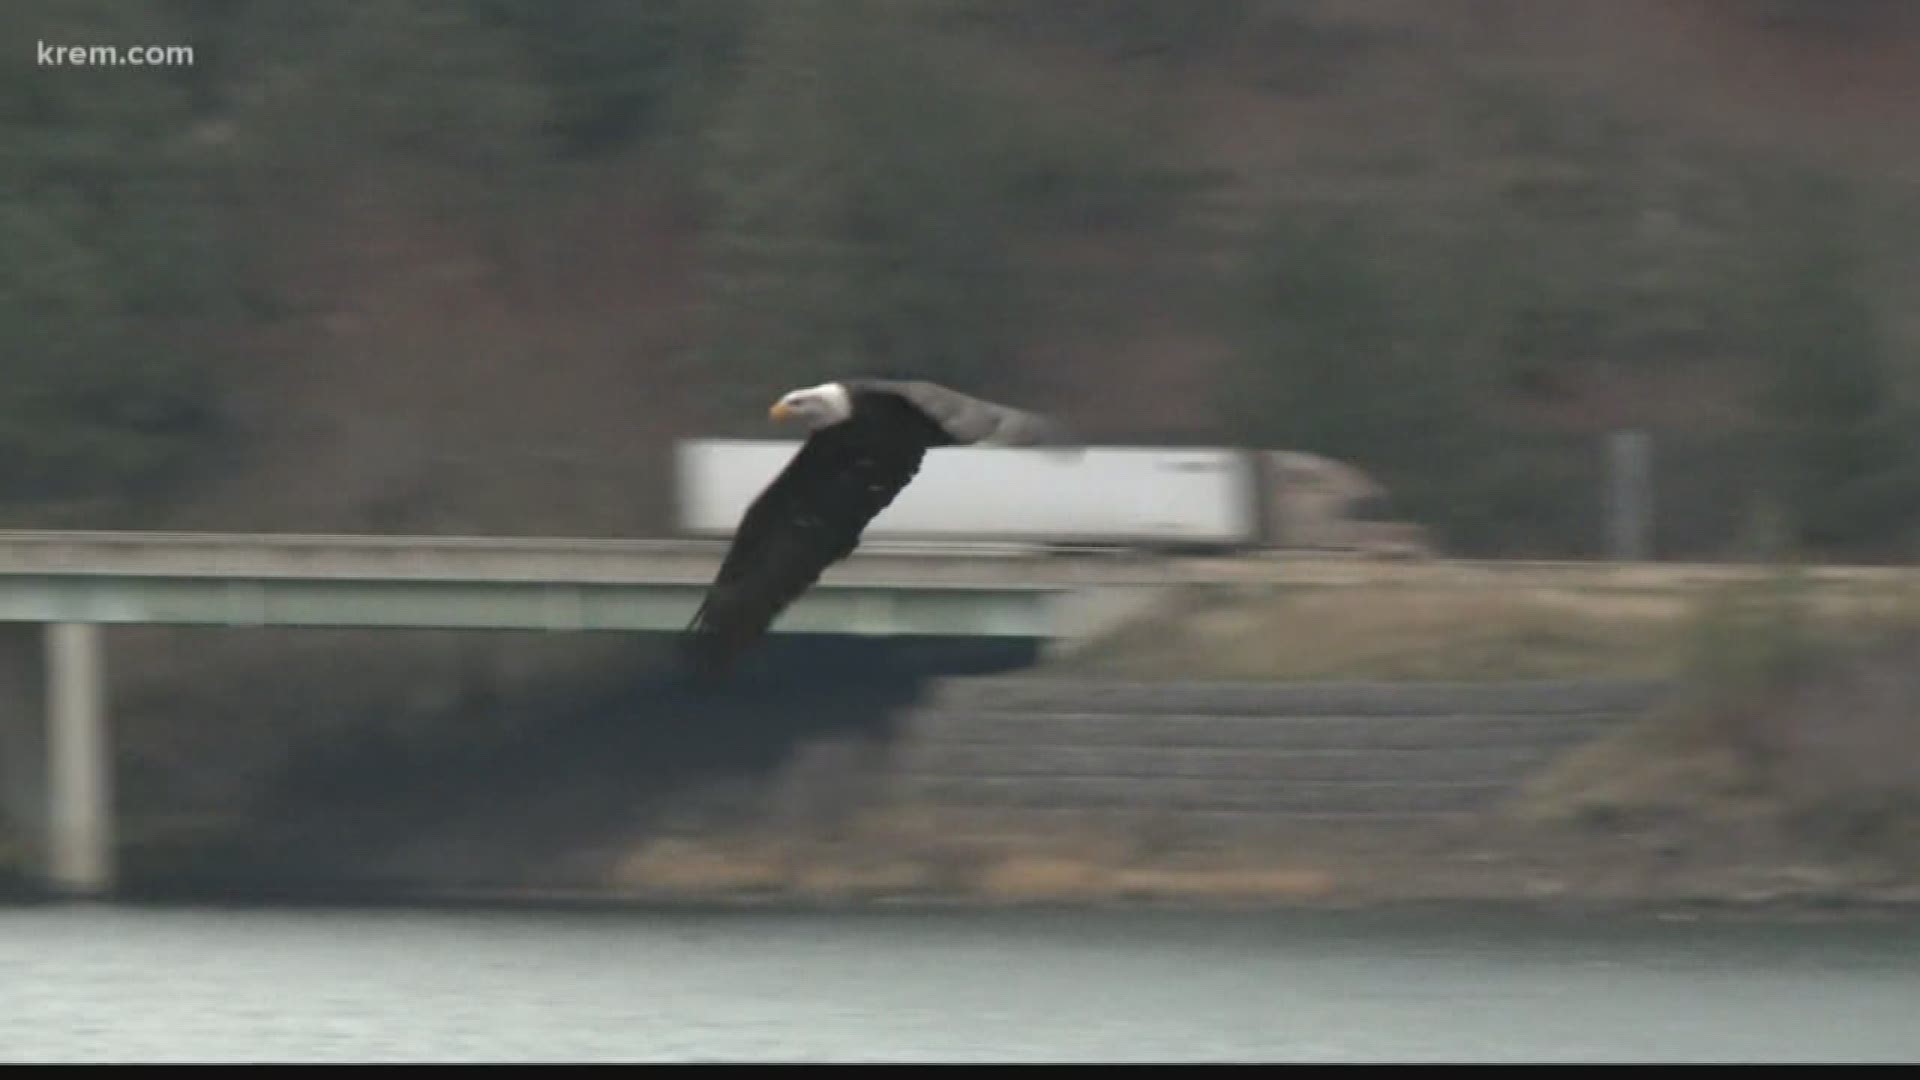 Have you visited Lake Coeur d'Alene to see the eagles? Every year, the spectacle draws people to North Idaho. And for some stores and restaurants, that can mean a boost in business.